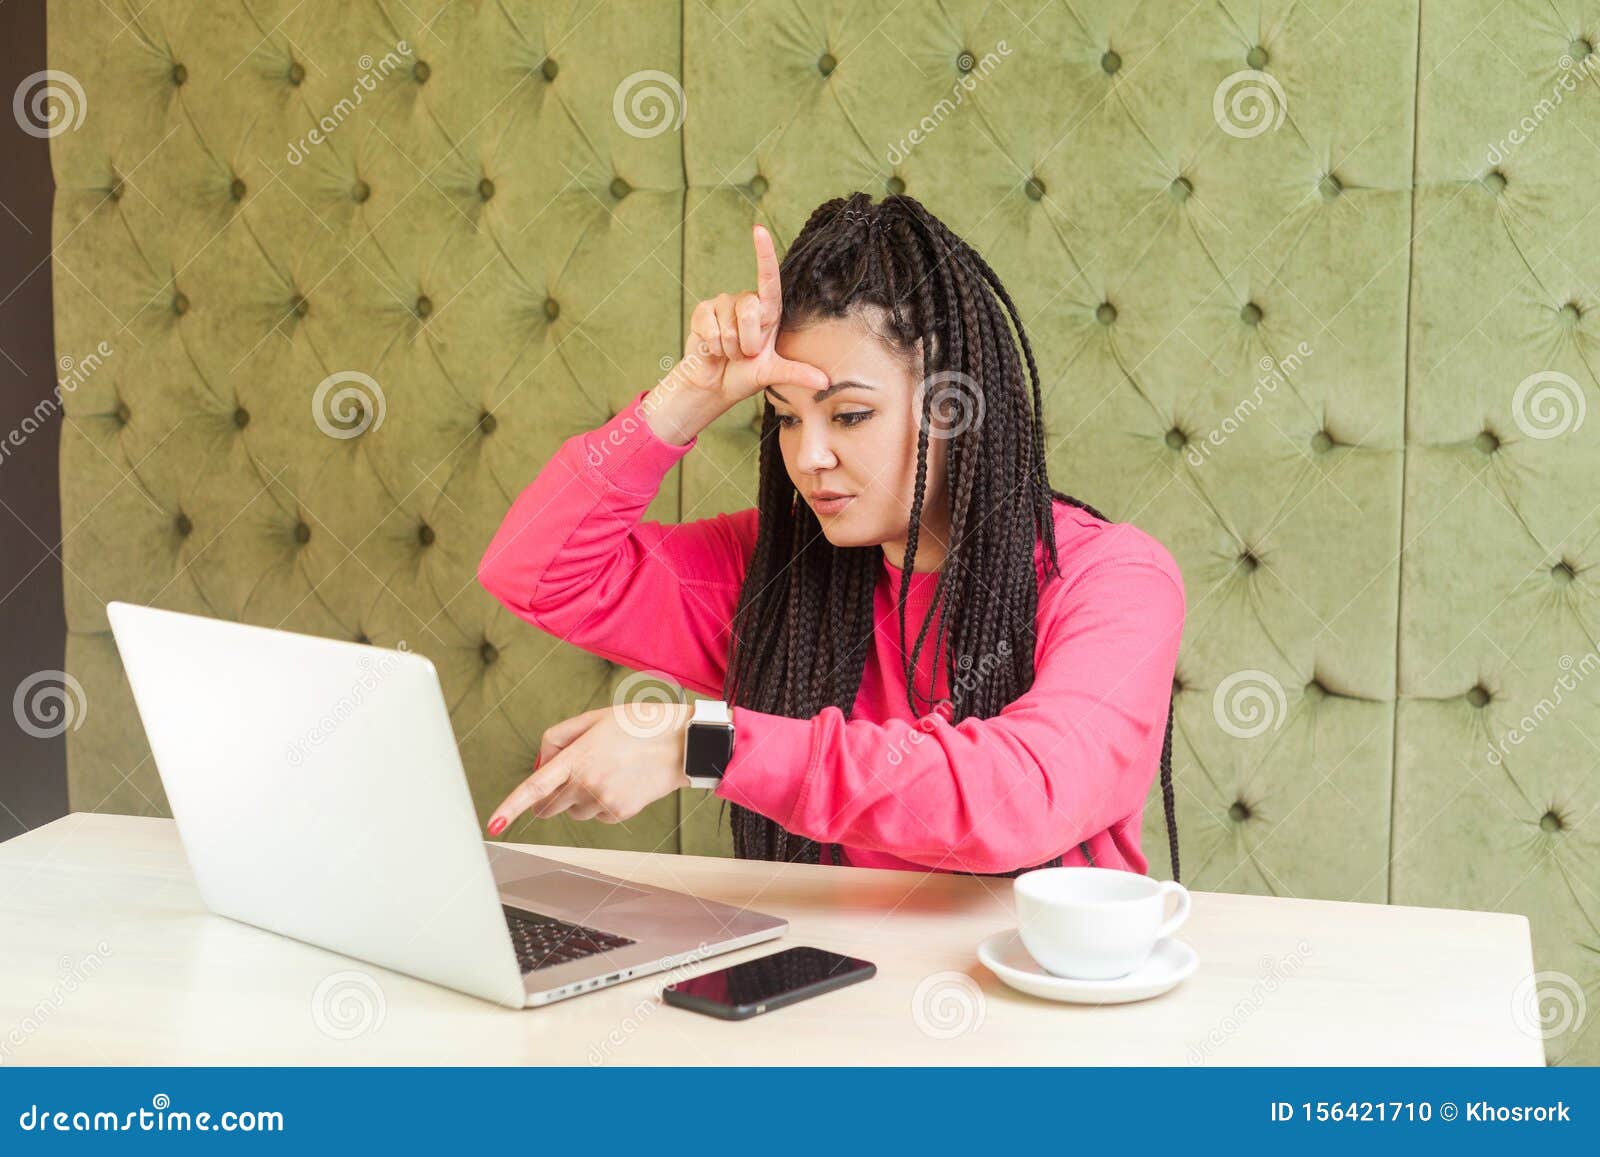 Loser Portrait Of Unhappy Rude Young Girl Freelancer With